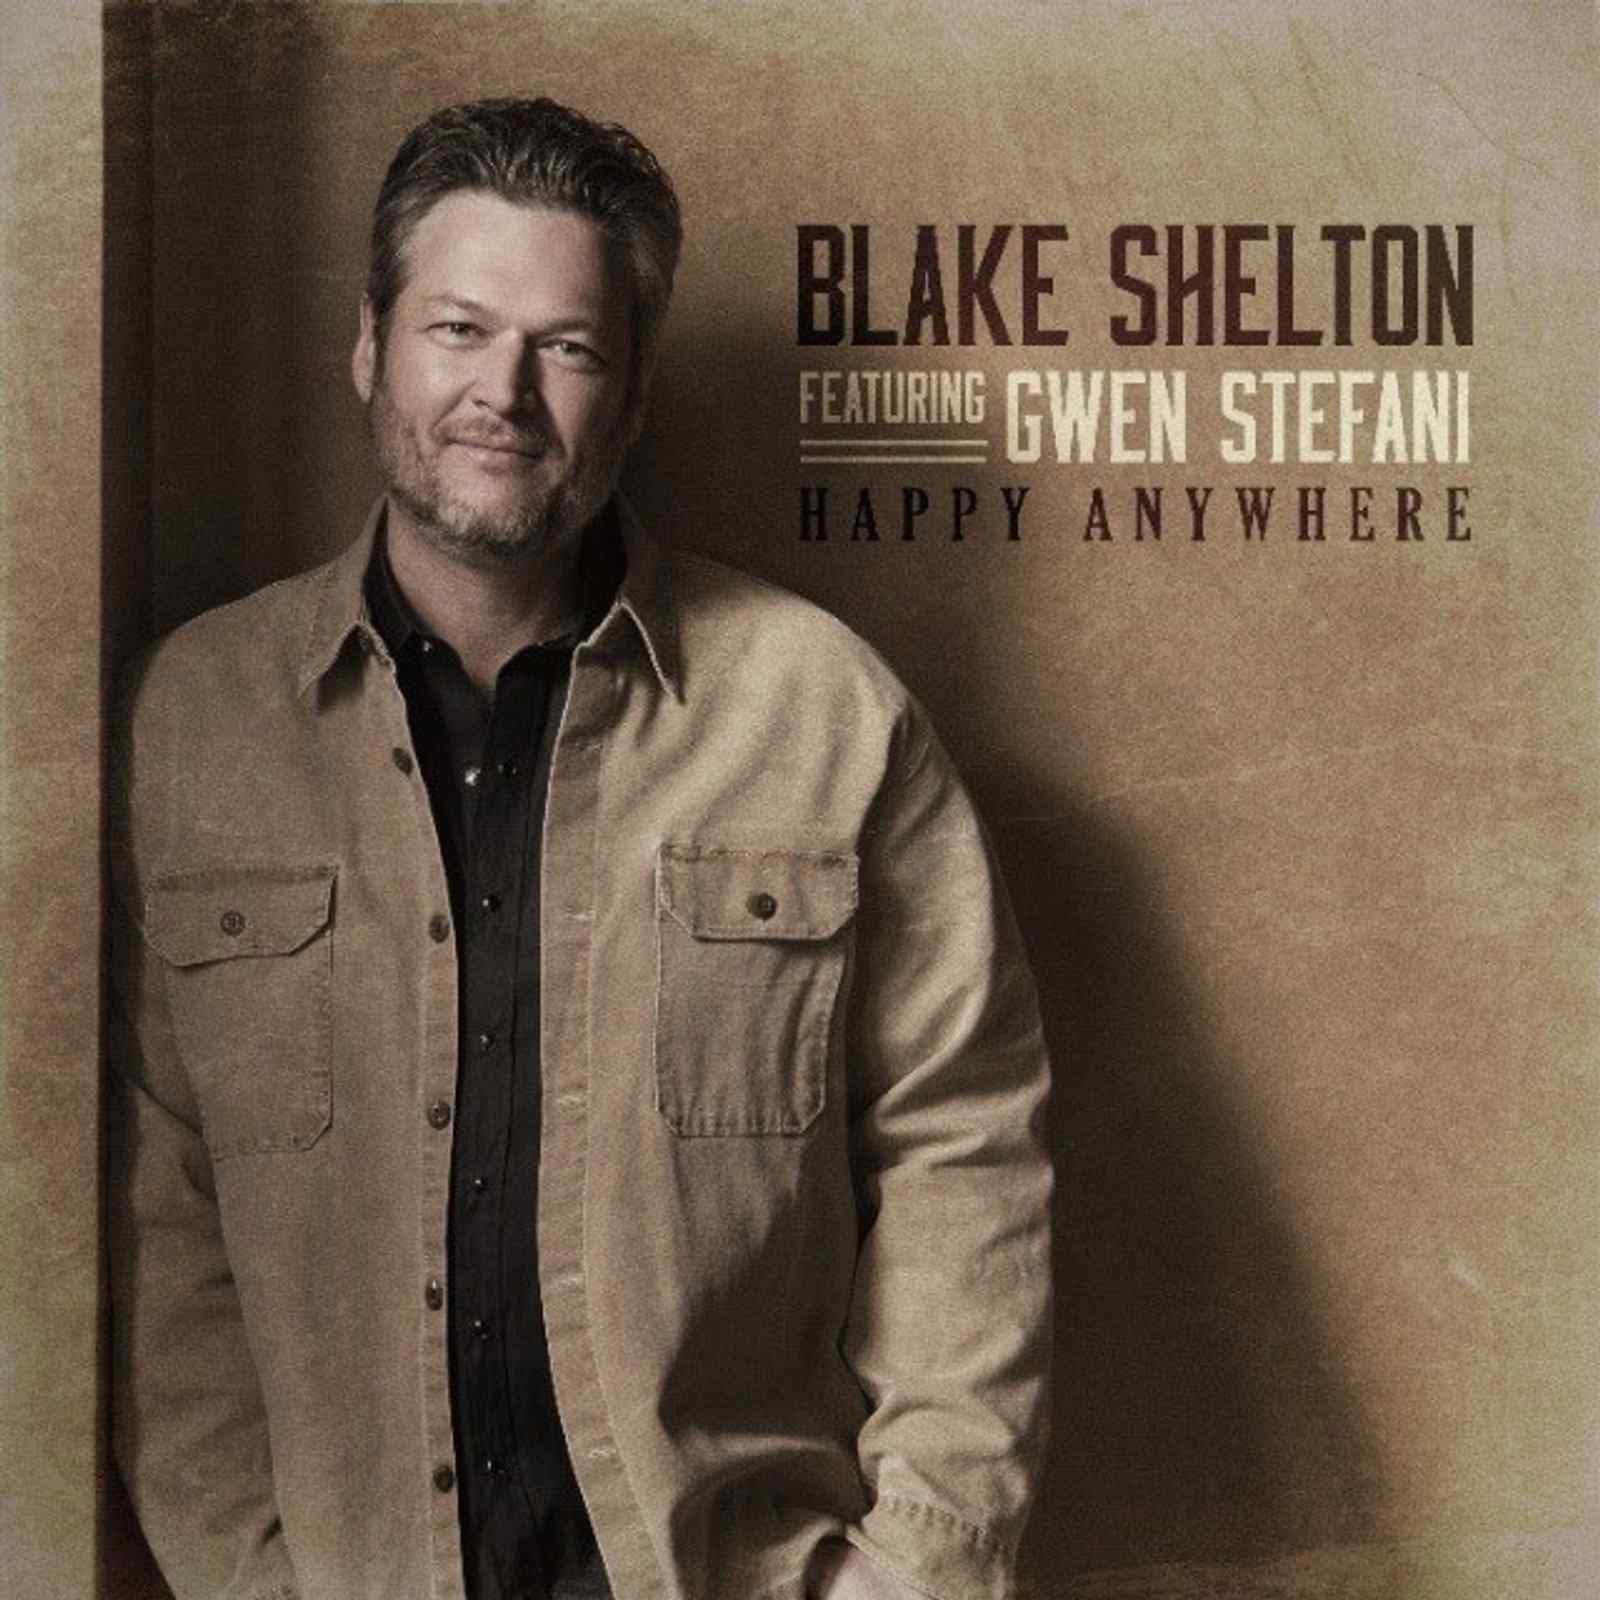 New Song: "Happy Anywhere" by Blake Shelton featuring Gwen Stefani